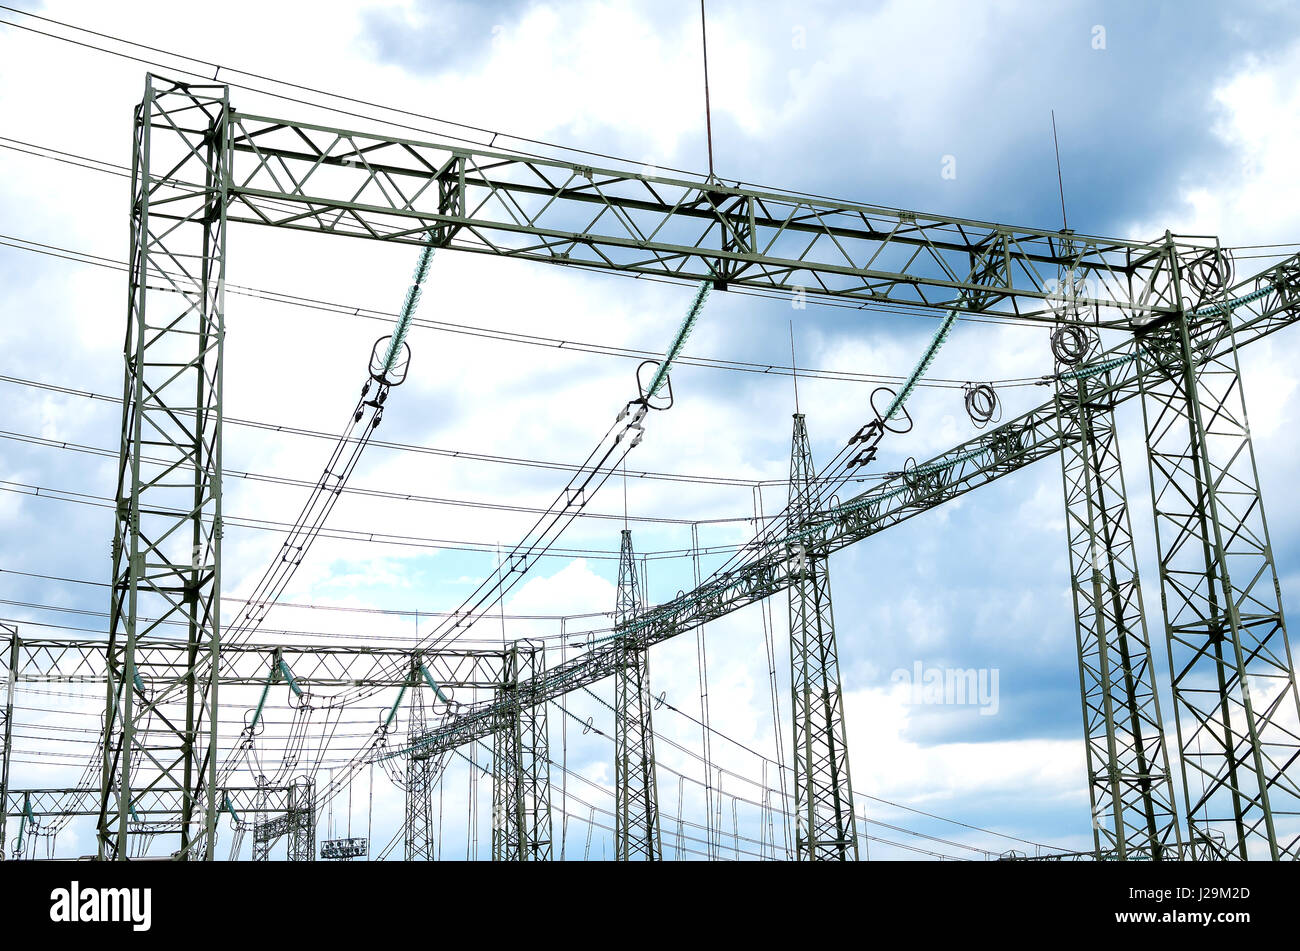 Electricity distribution. Elements of electrical pylon - insulators, cables and fasteners Stock Photo